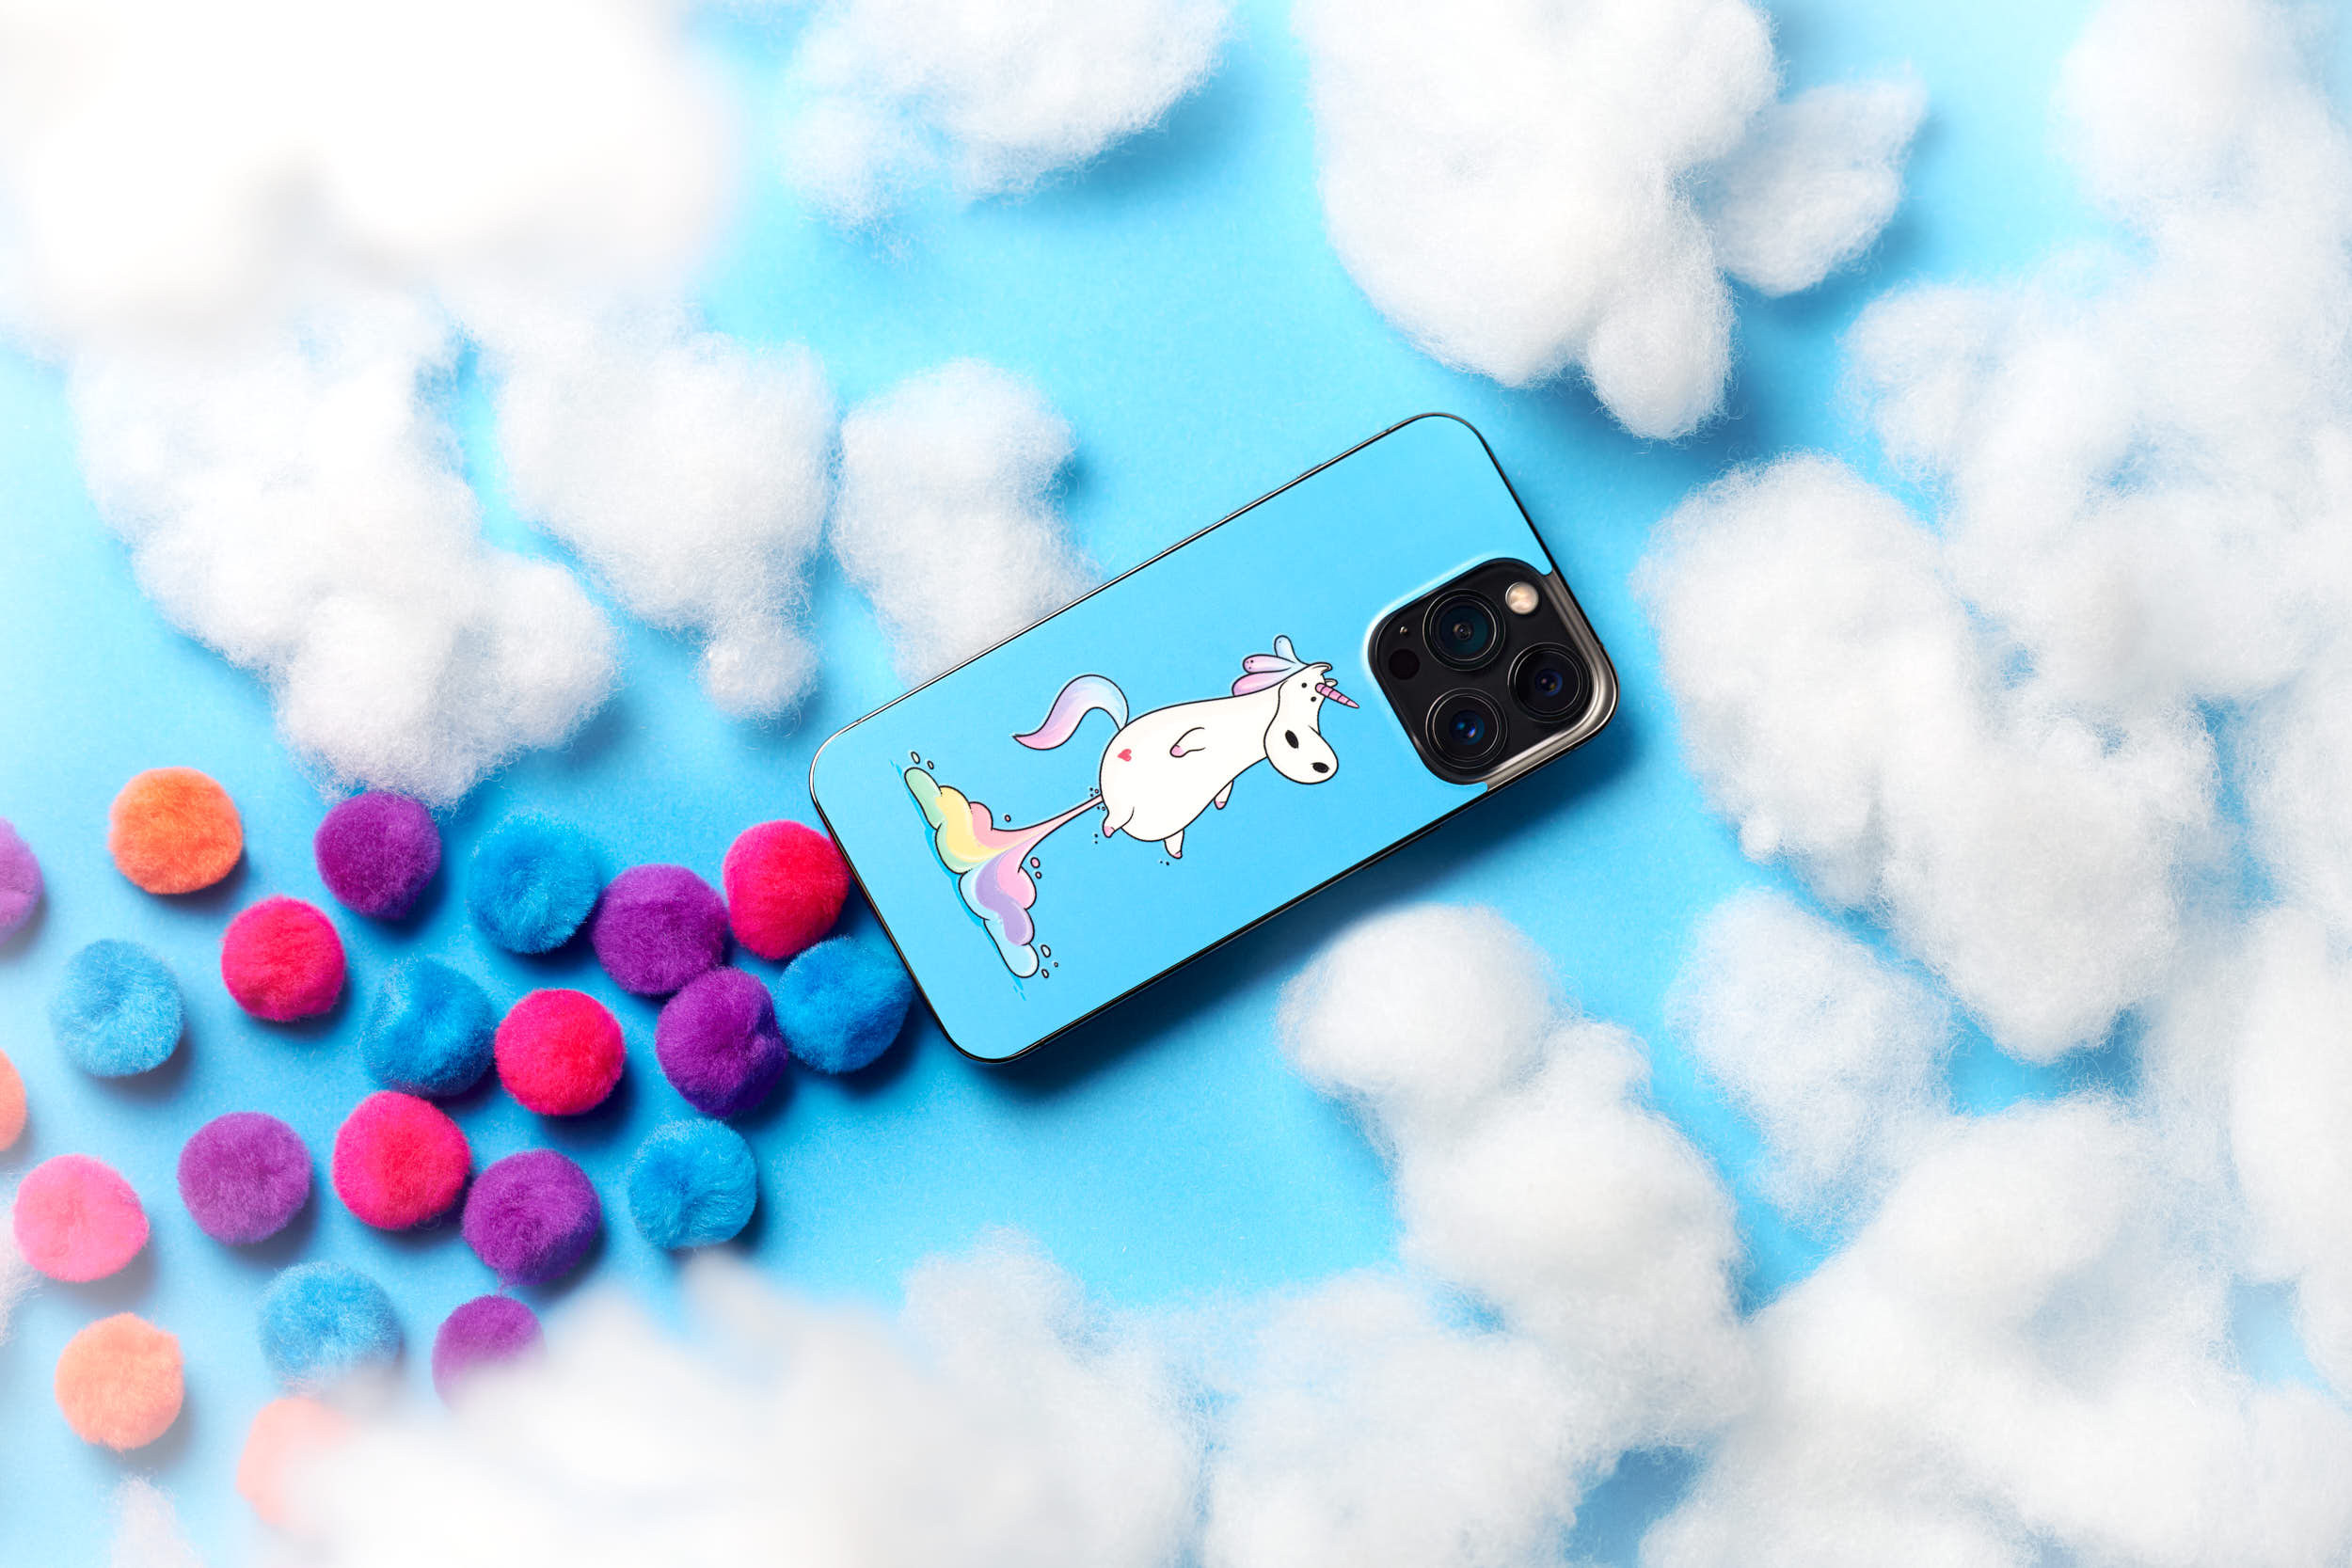 Product photo of a phone skin from Rabbiter. As the graphic of the skin, the phone is supported by colors flying through the air. With the clouds around the phone the images has a dreamy, funny and colorful concept.